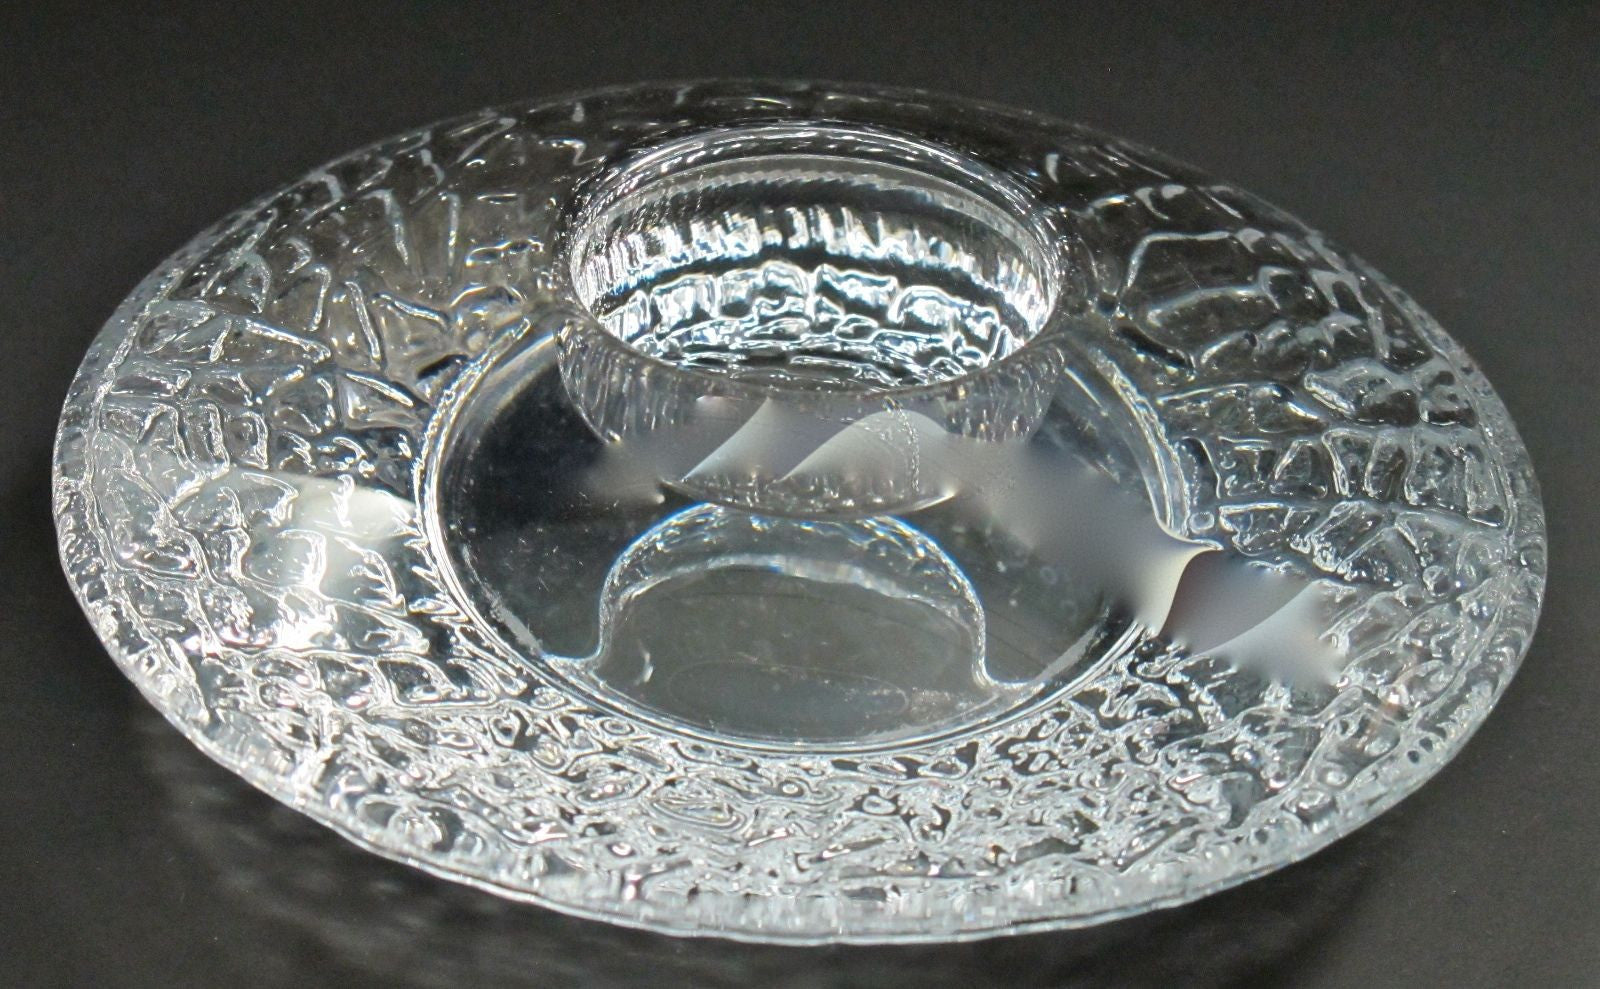 Orrefors discus crystal candle holder